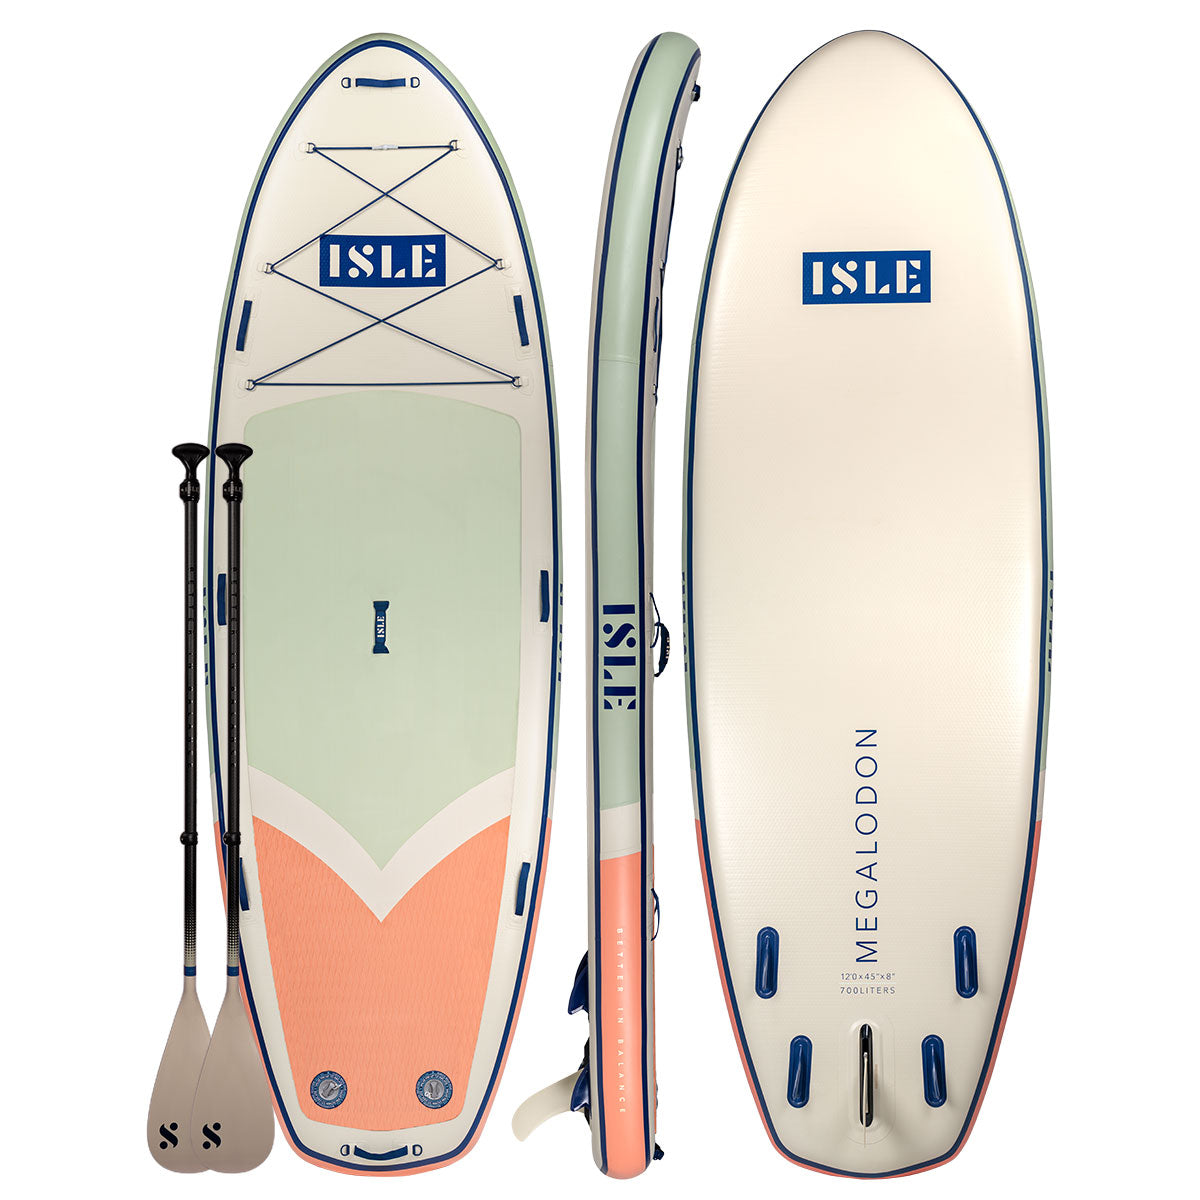 Megalodon 2.0 Inflatable Multi-Person Paddle Board in Seafoam/Peach